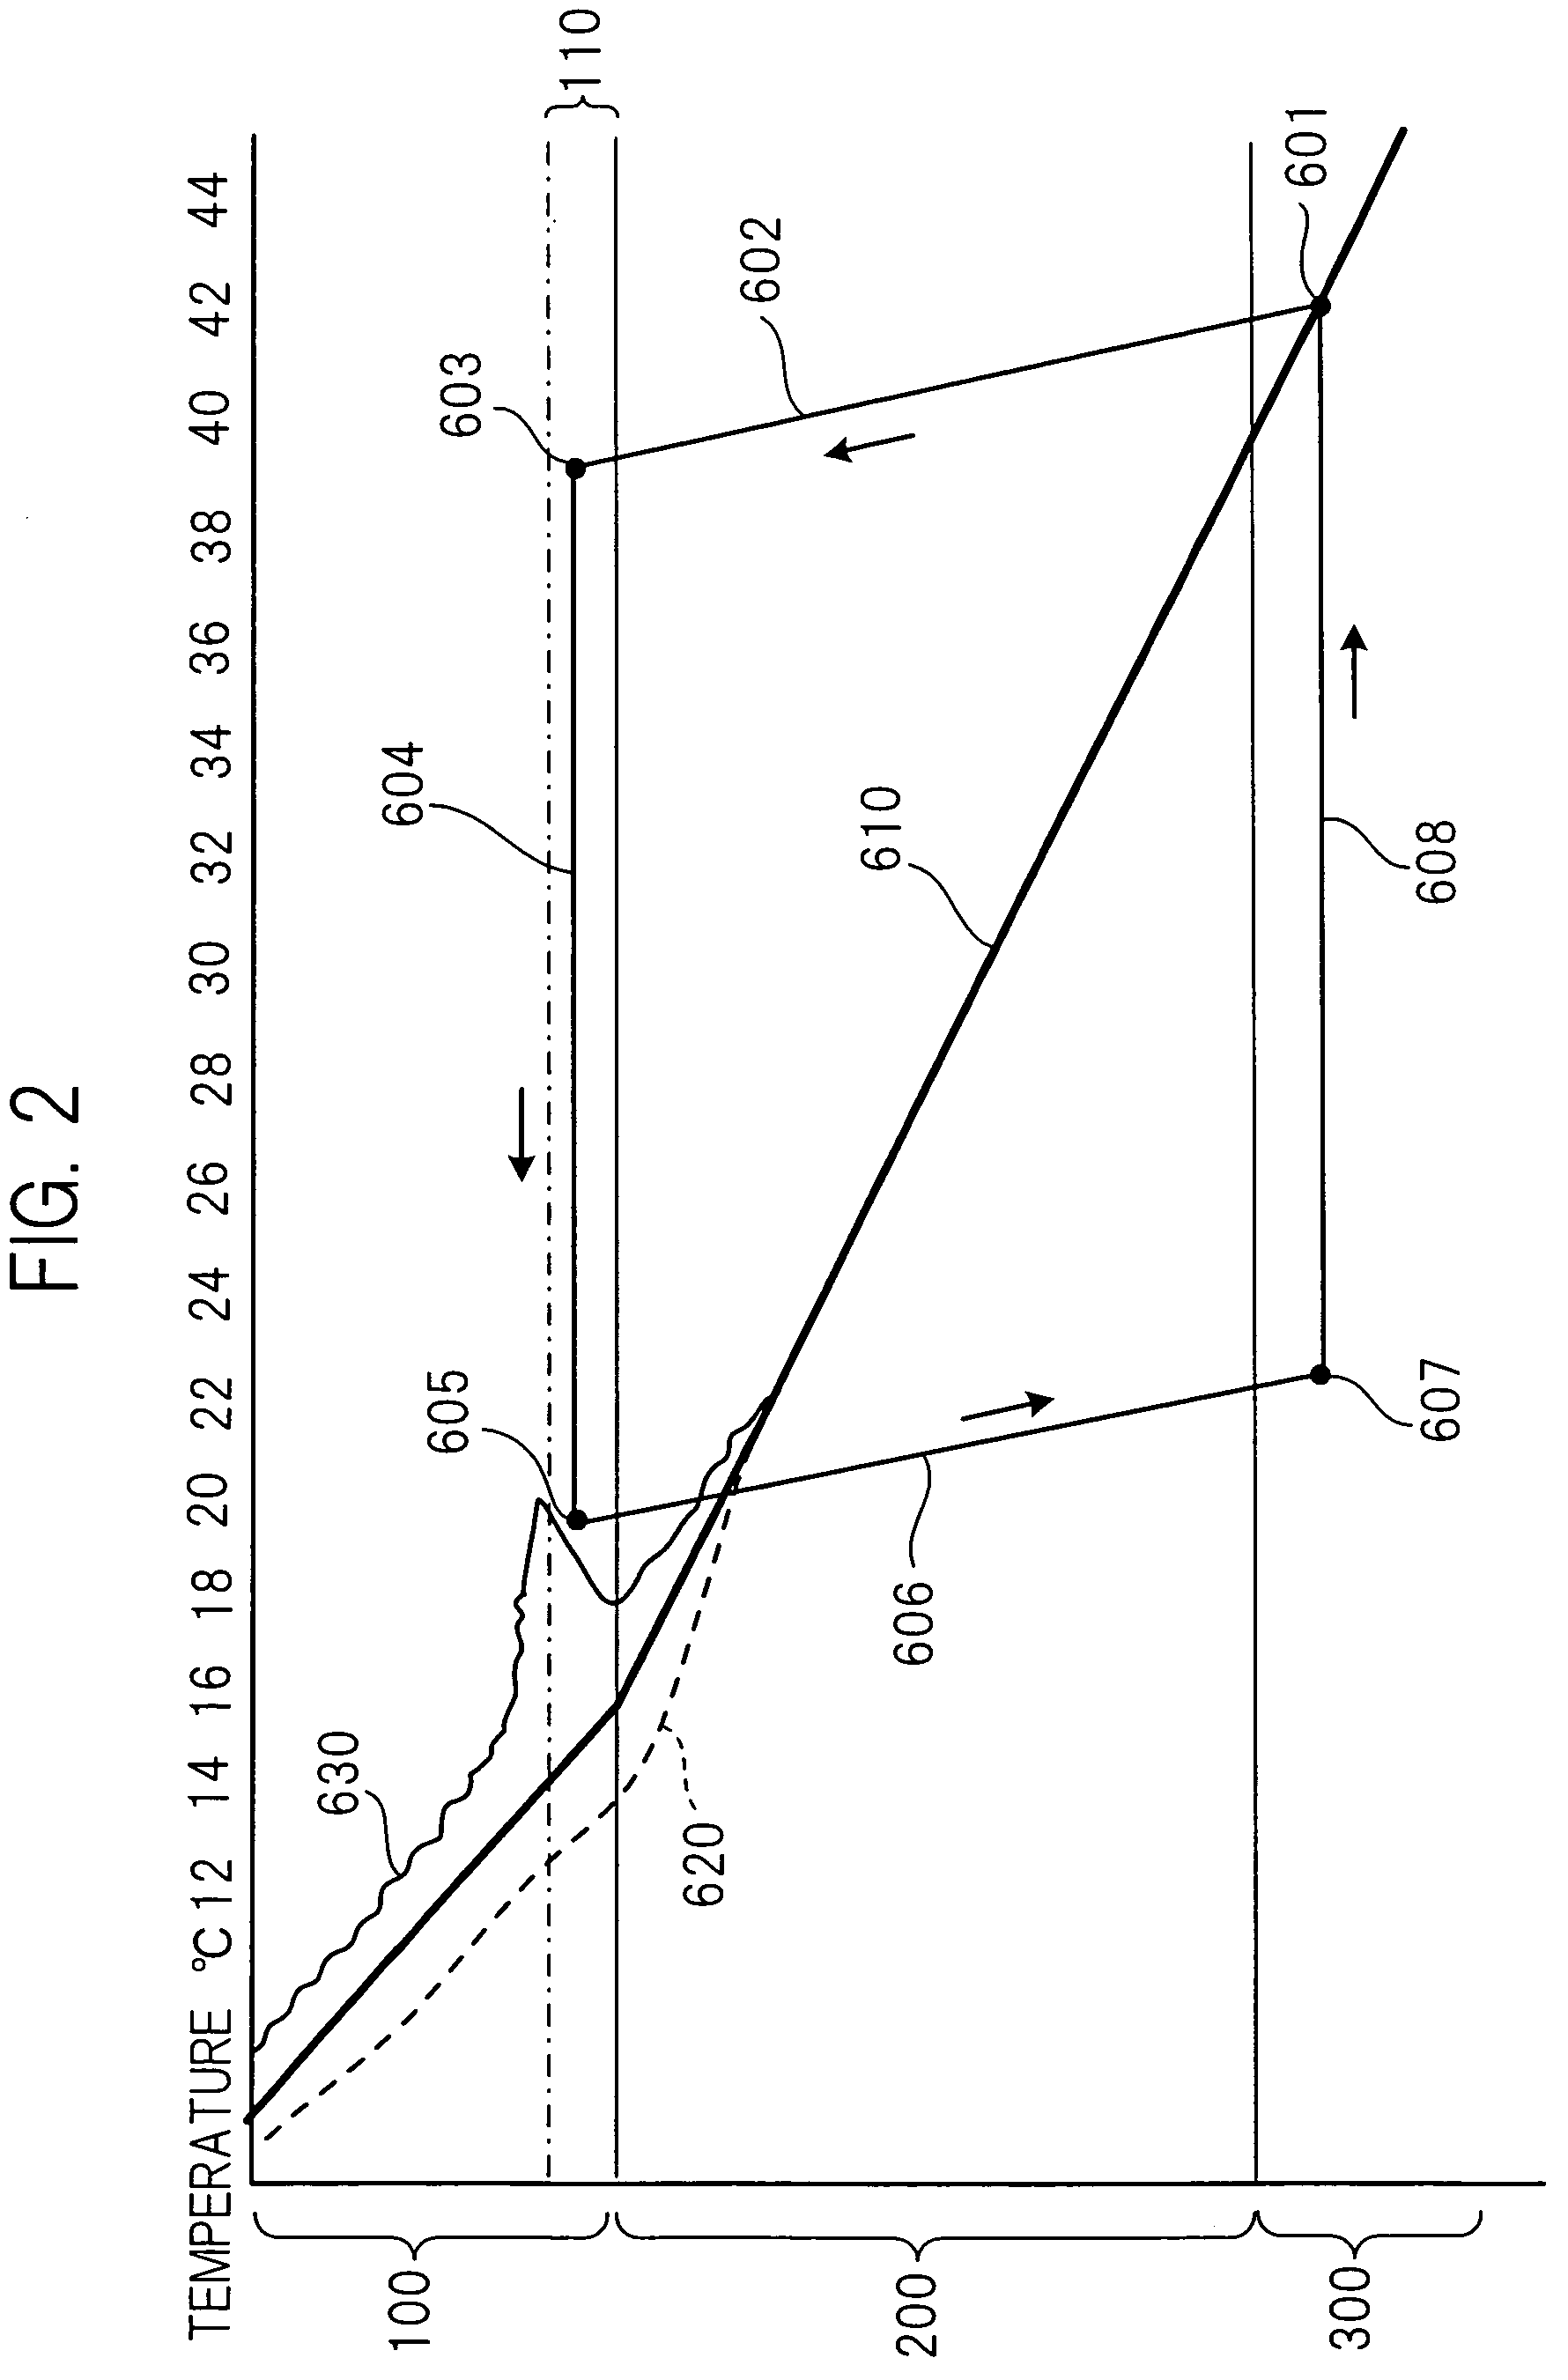 Methane hydrate dissociation accelerating and methane gas deriving system